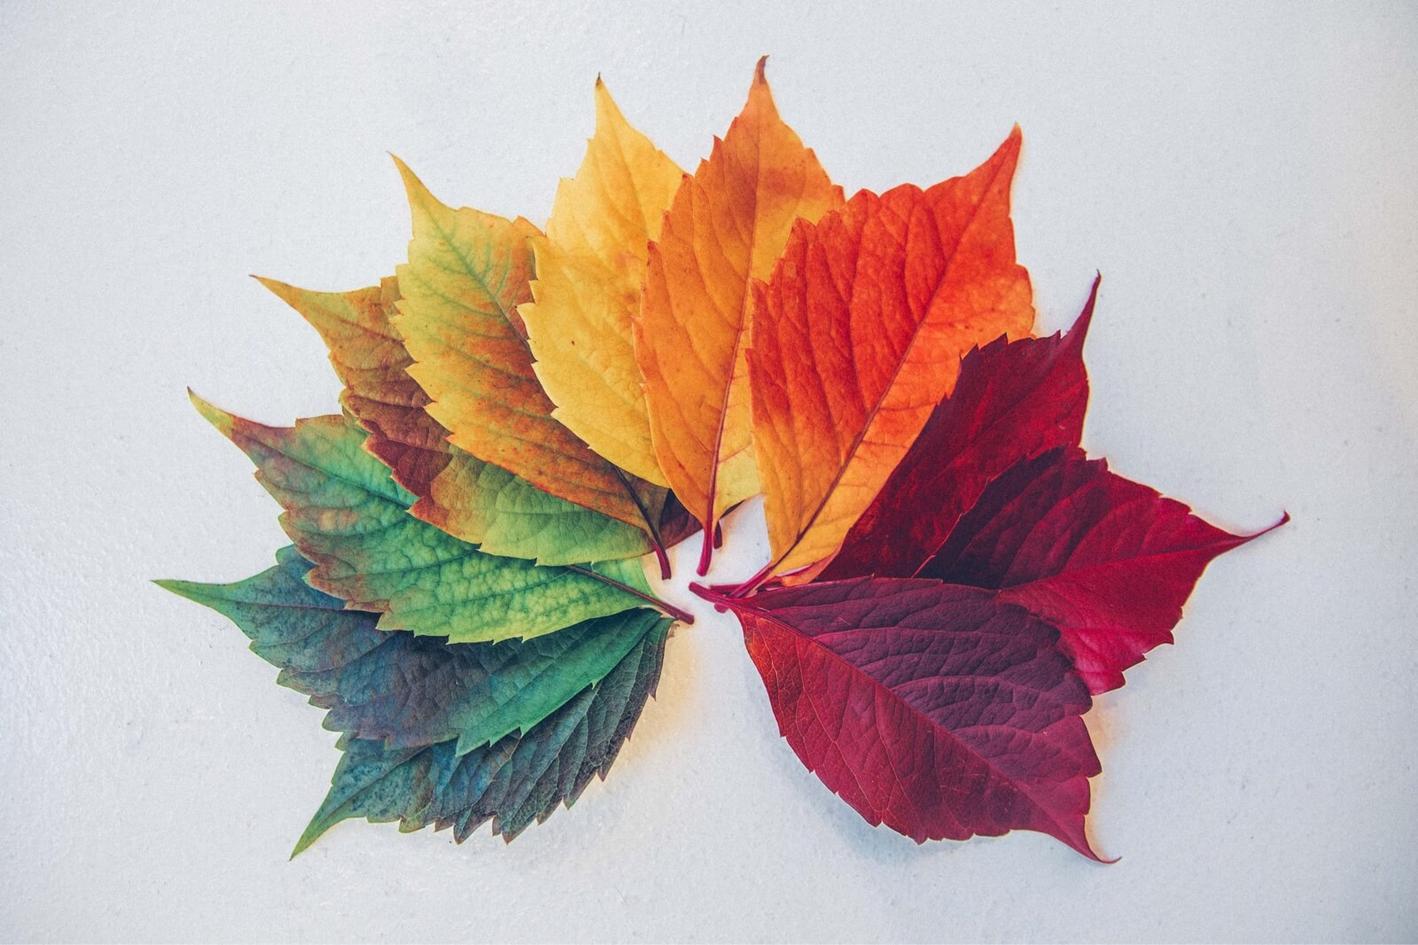 Leaf whose colours reflect the chancing of the seasons, from green to red